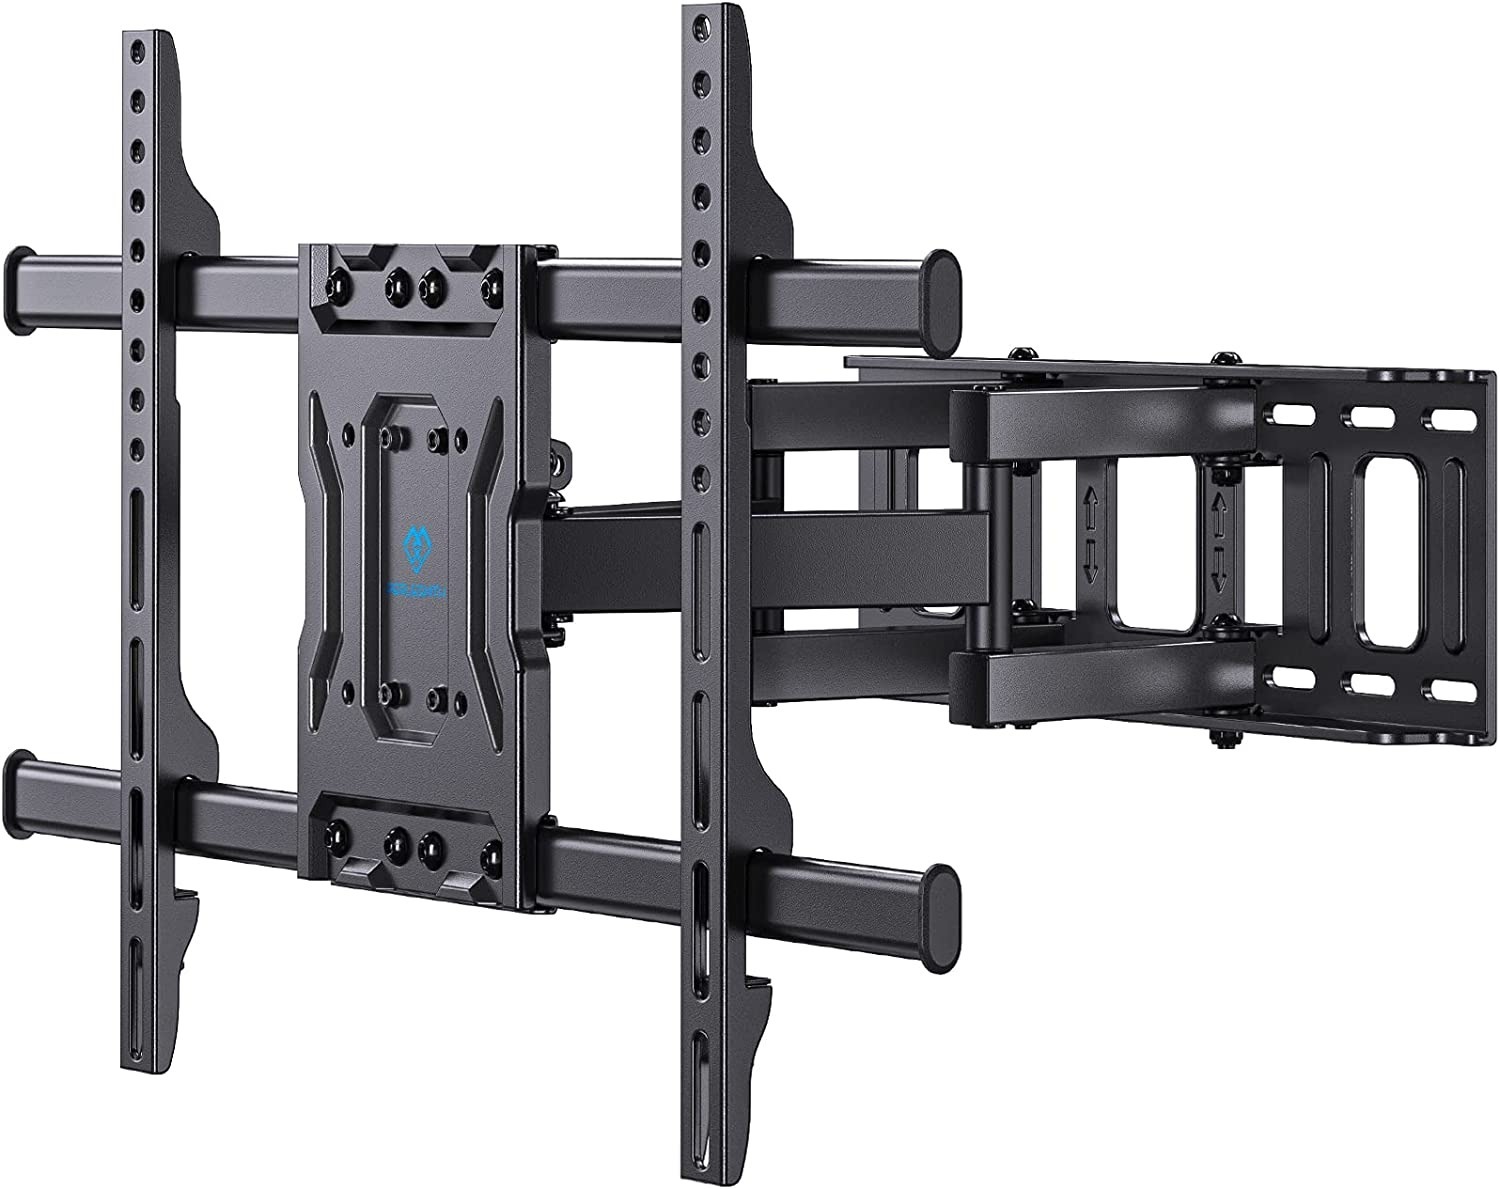 Amazon Prime Members: PERLESMITH Full Motion TV Wall Mount (for 37-84" TVs/ Up to 132-lbs) $24.69 + Free Shipping